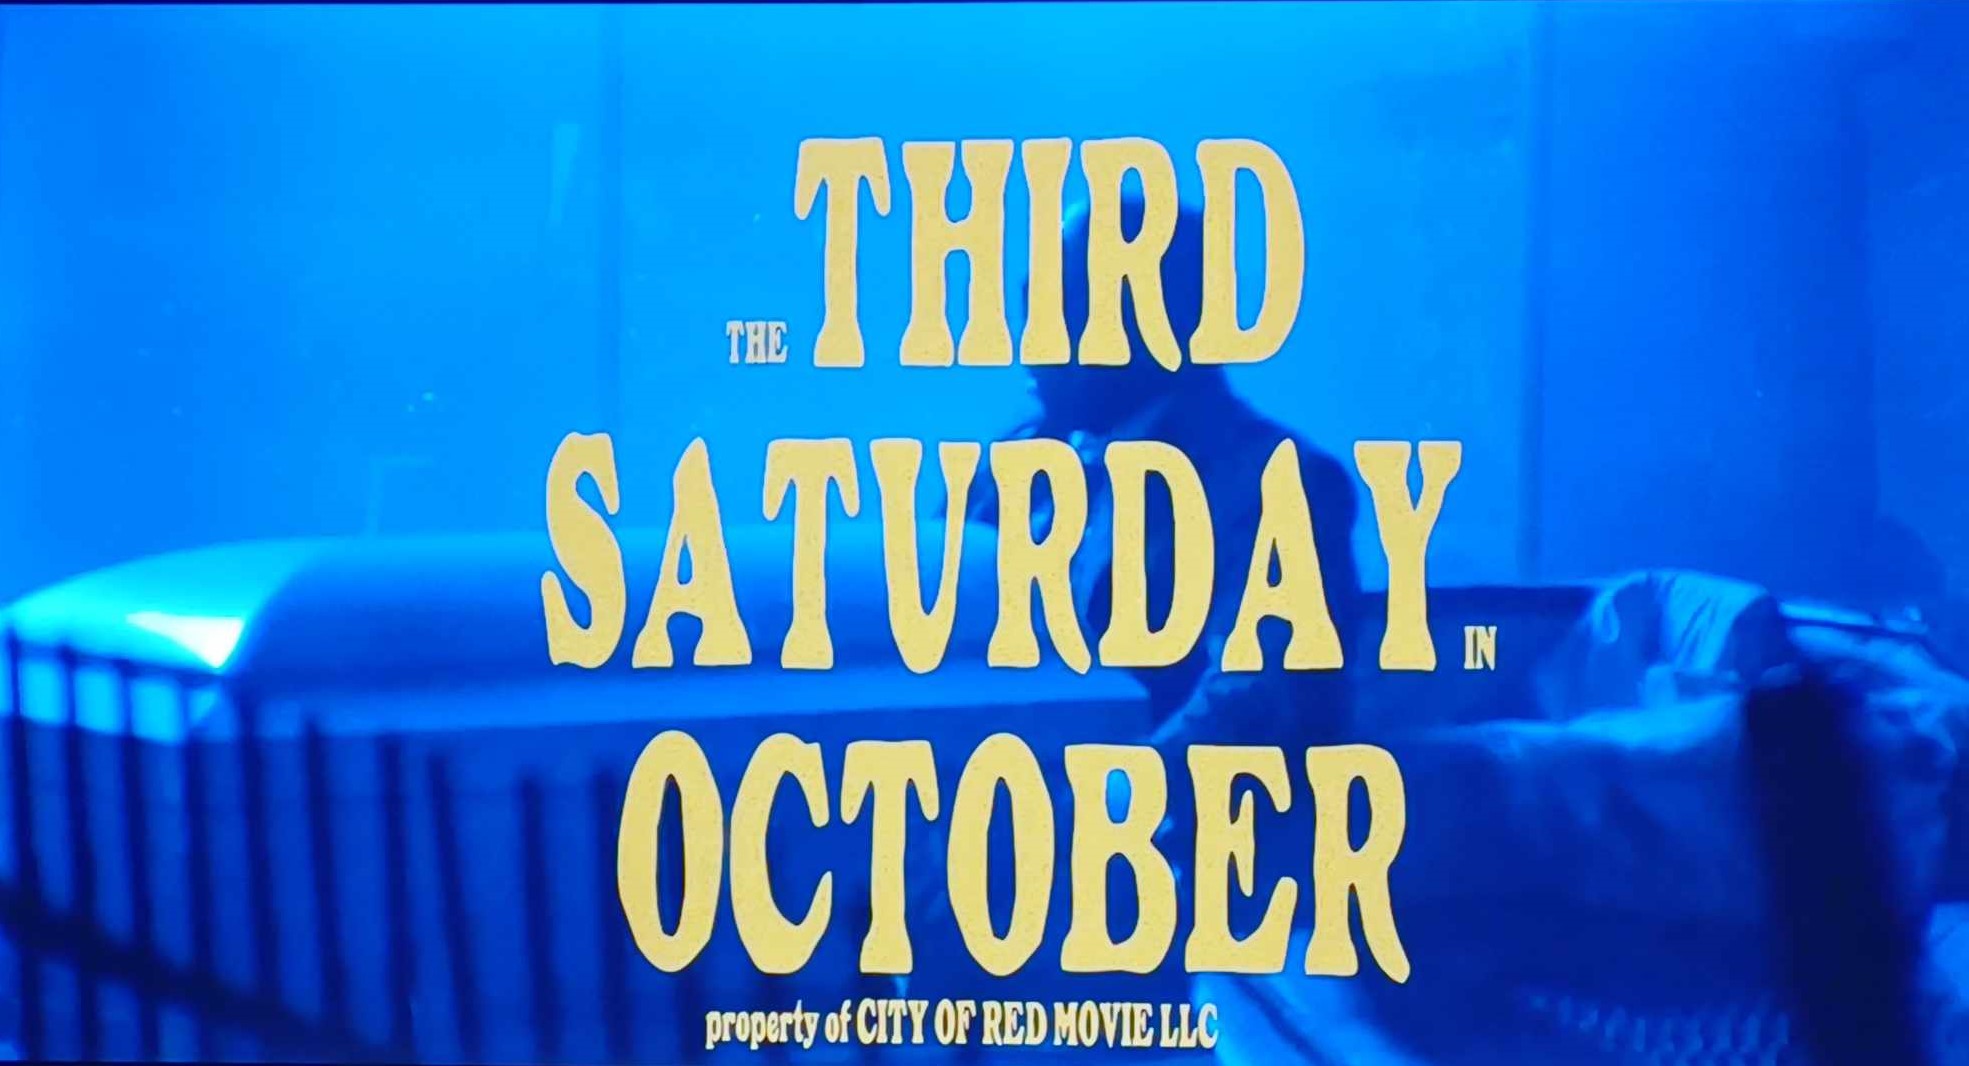 Thank god October 3rd falls on a Sunday this year… brb binging